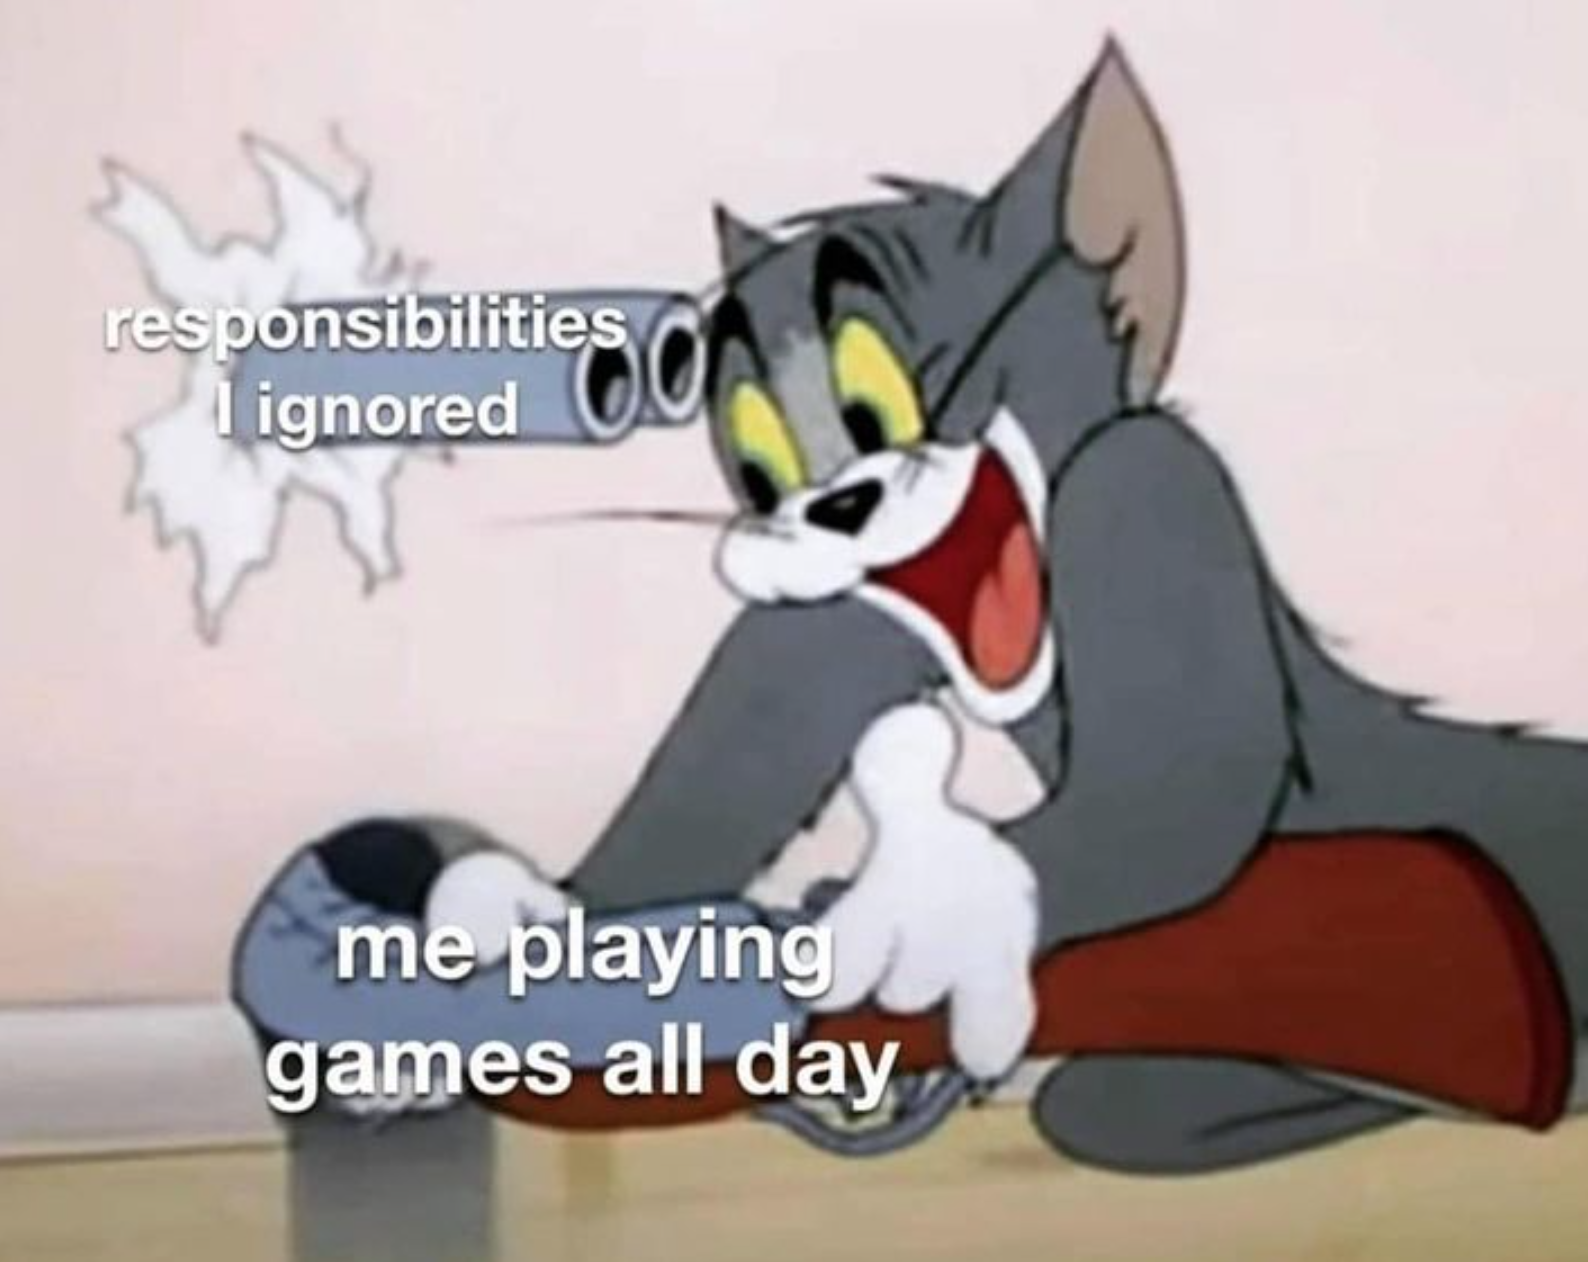 funny gaming memes - tom and jerry meme template - responsibilities I ignored me playing games all day